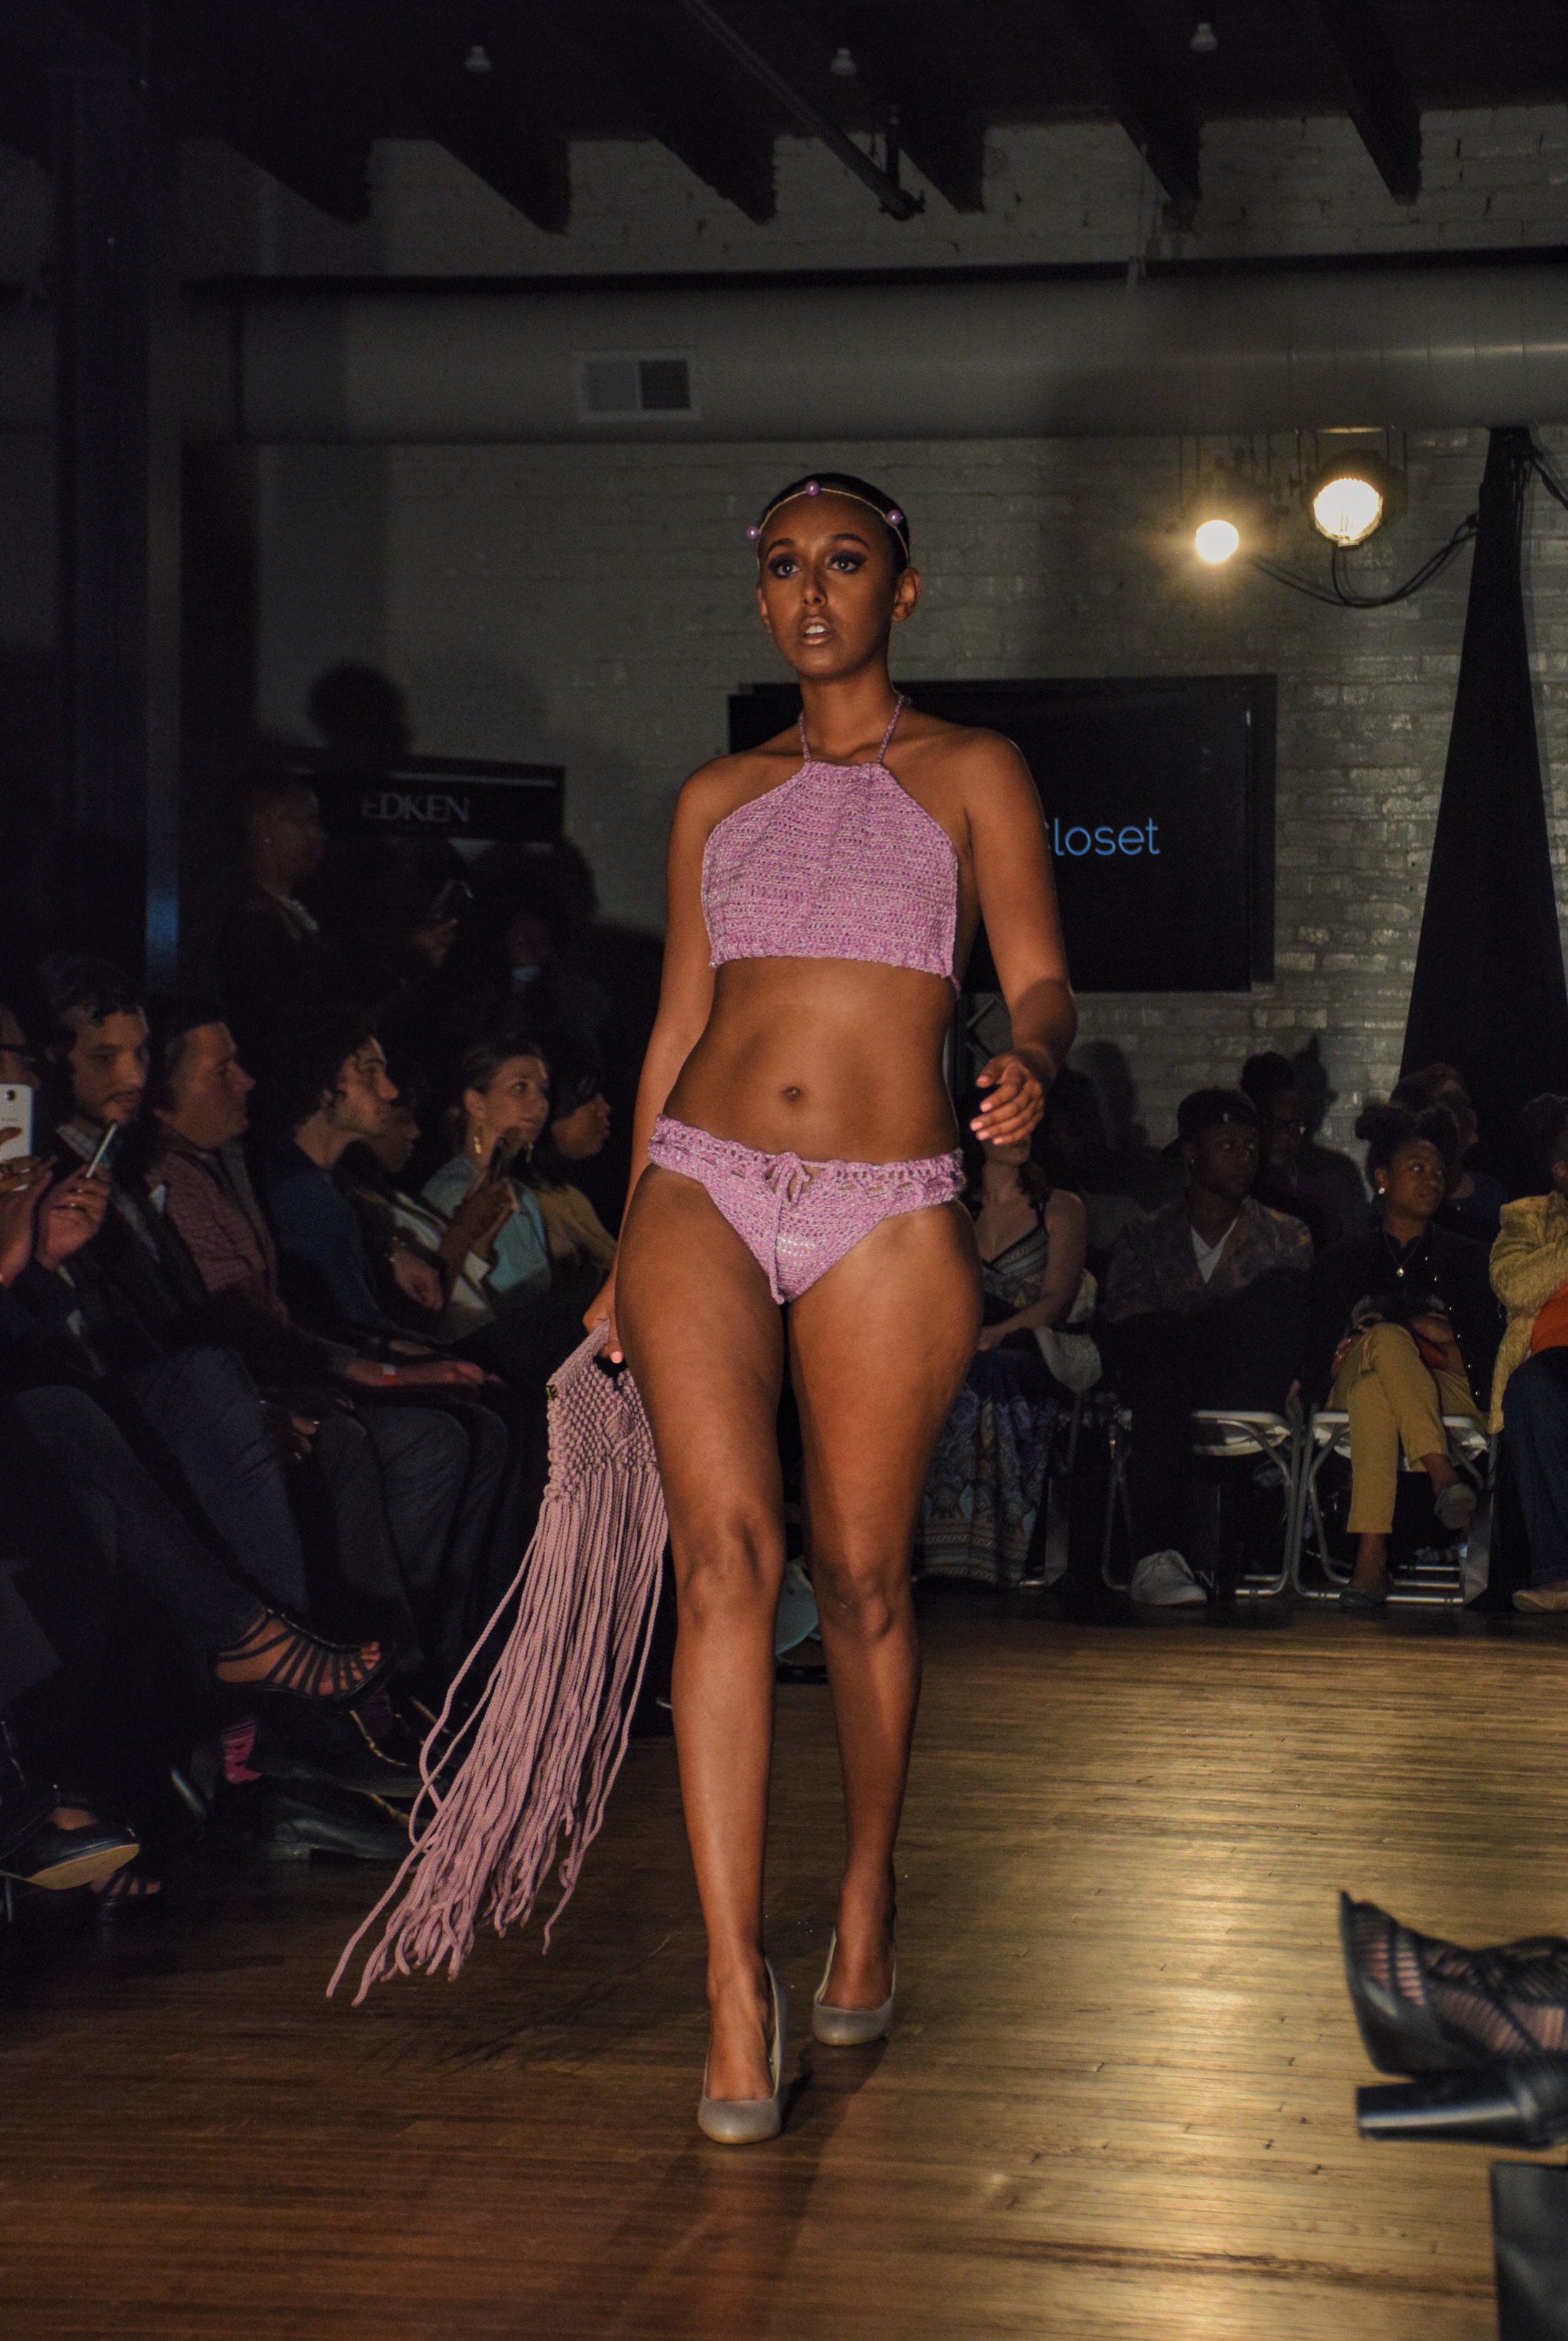 Tangees Closet by Tangee Massey Jones gave a bohemian 70s flare with crayola crochet swimwear juxtaposed with modern cuts and silhouettes. 